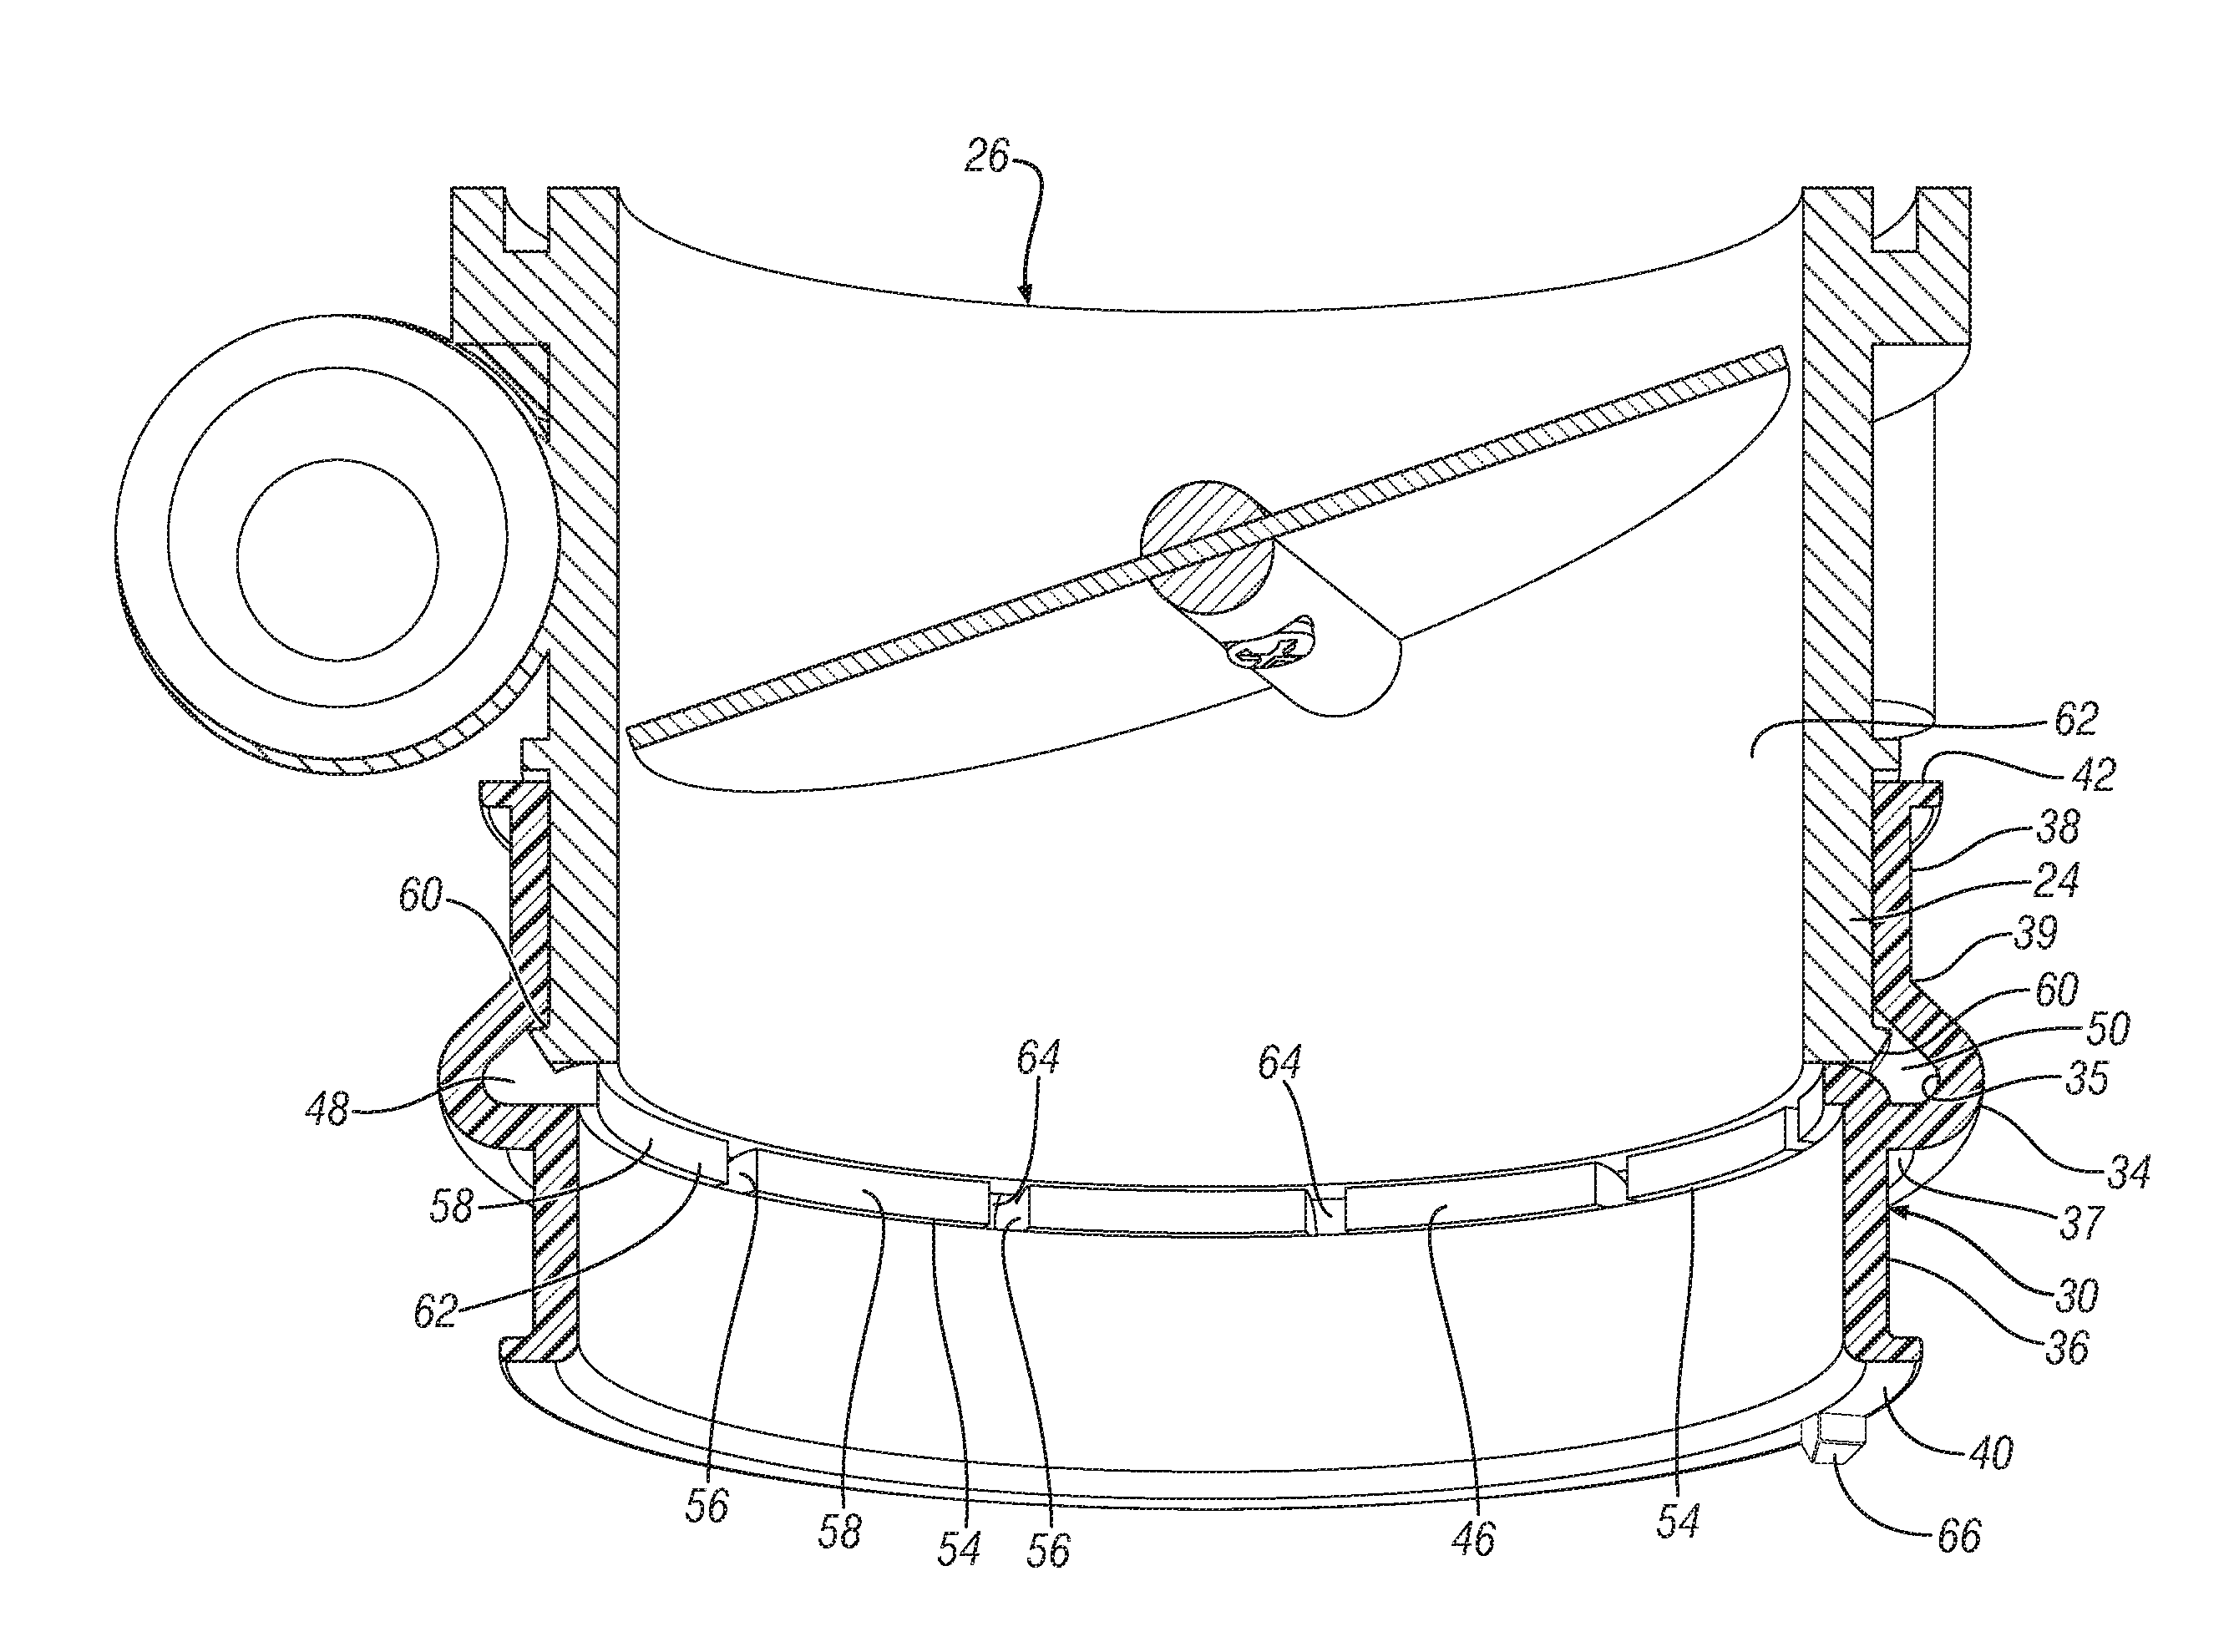 Engine air intake system with resilient coupling having internal noise attenuation tuning